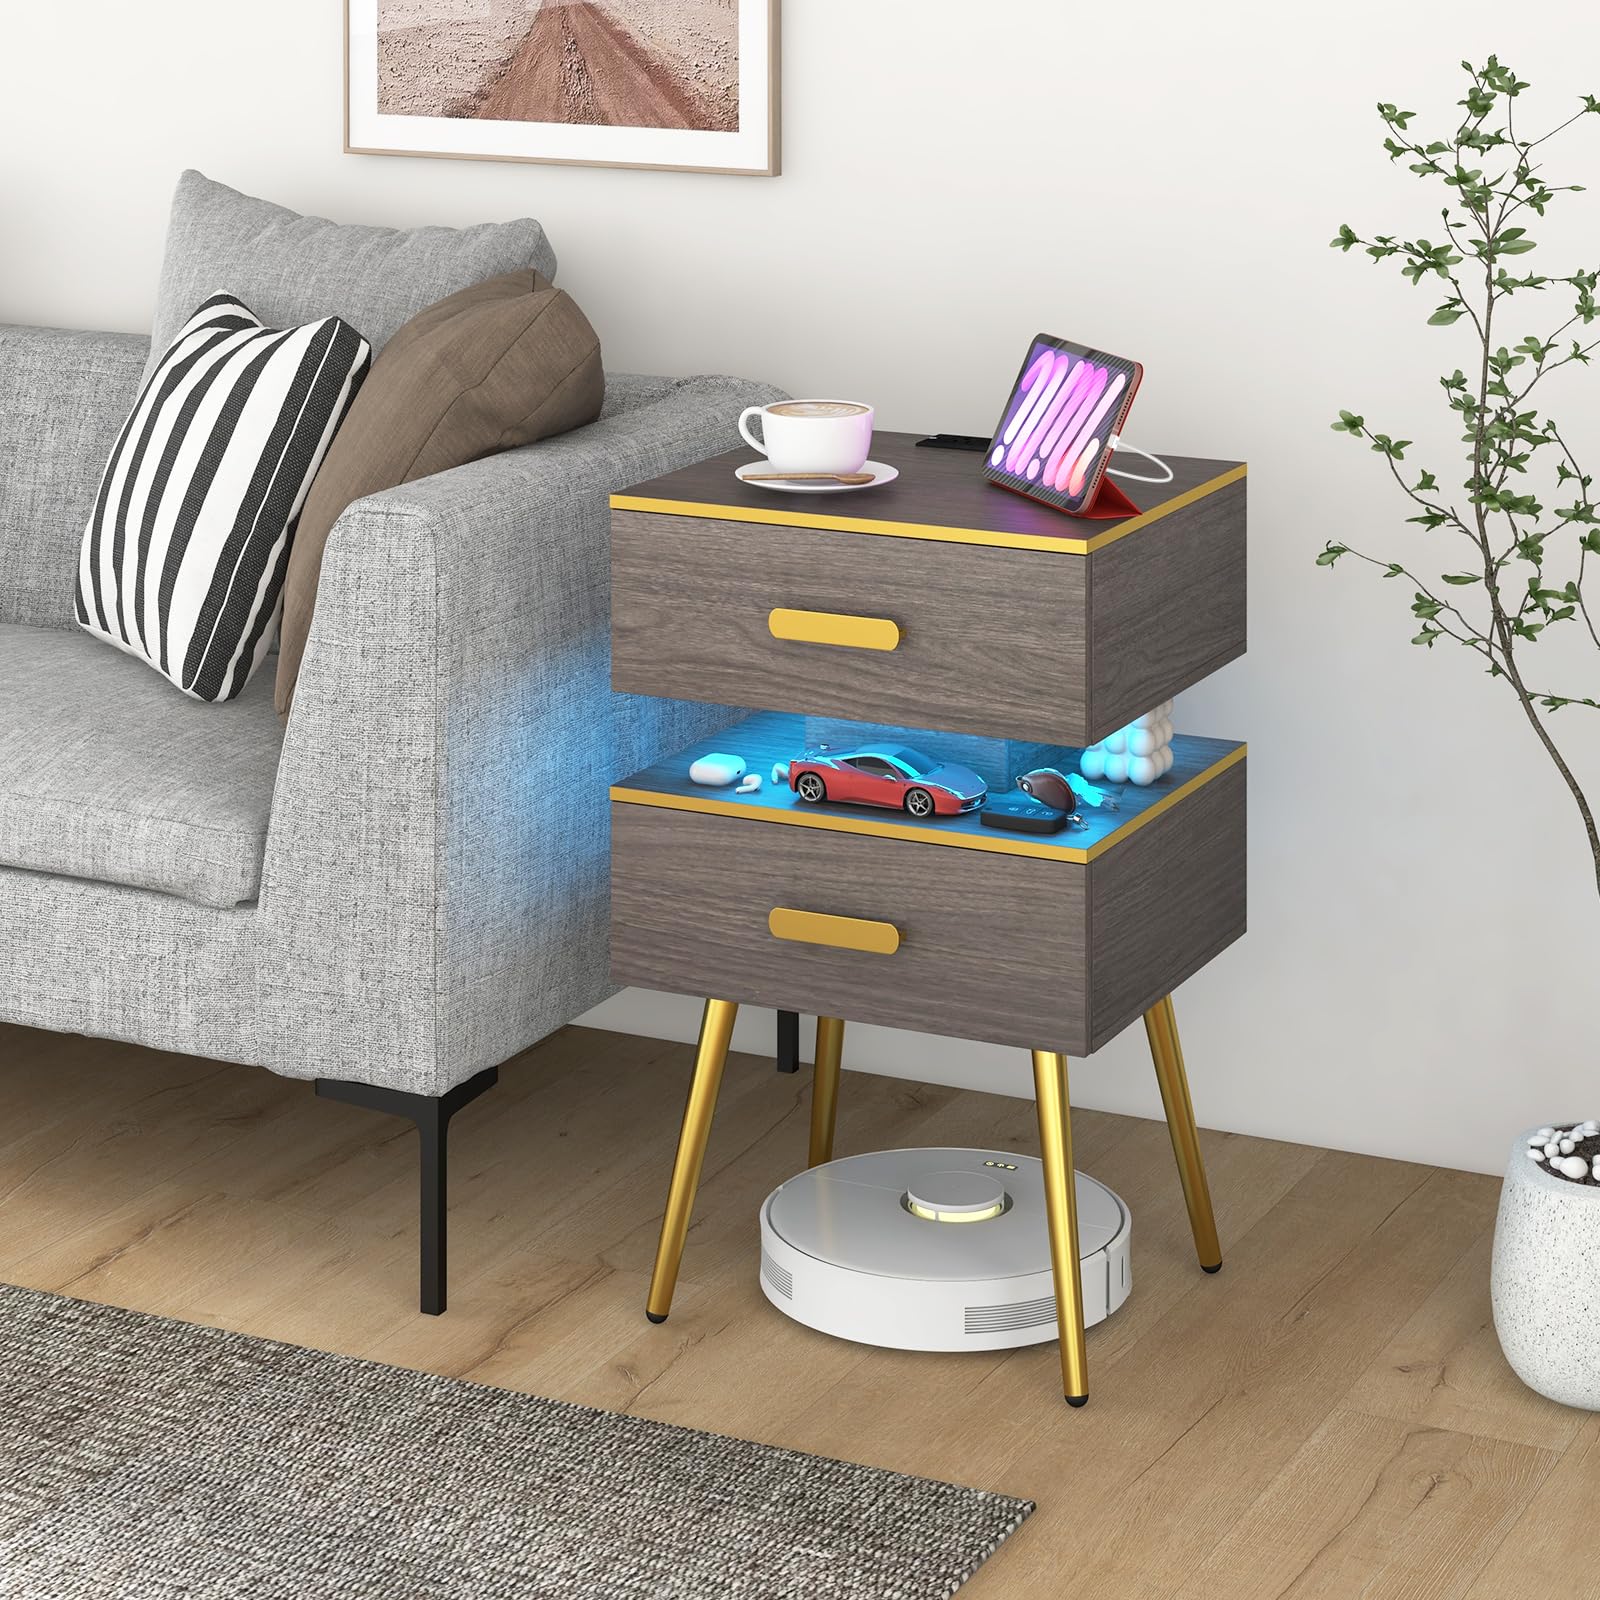 Giantex Nightstand with Charging Station & LED Lights, 28.5" Bedside Table with 2 Drawers